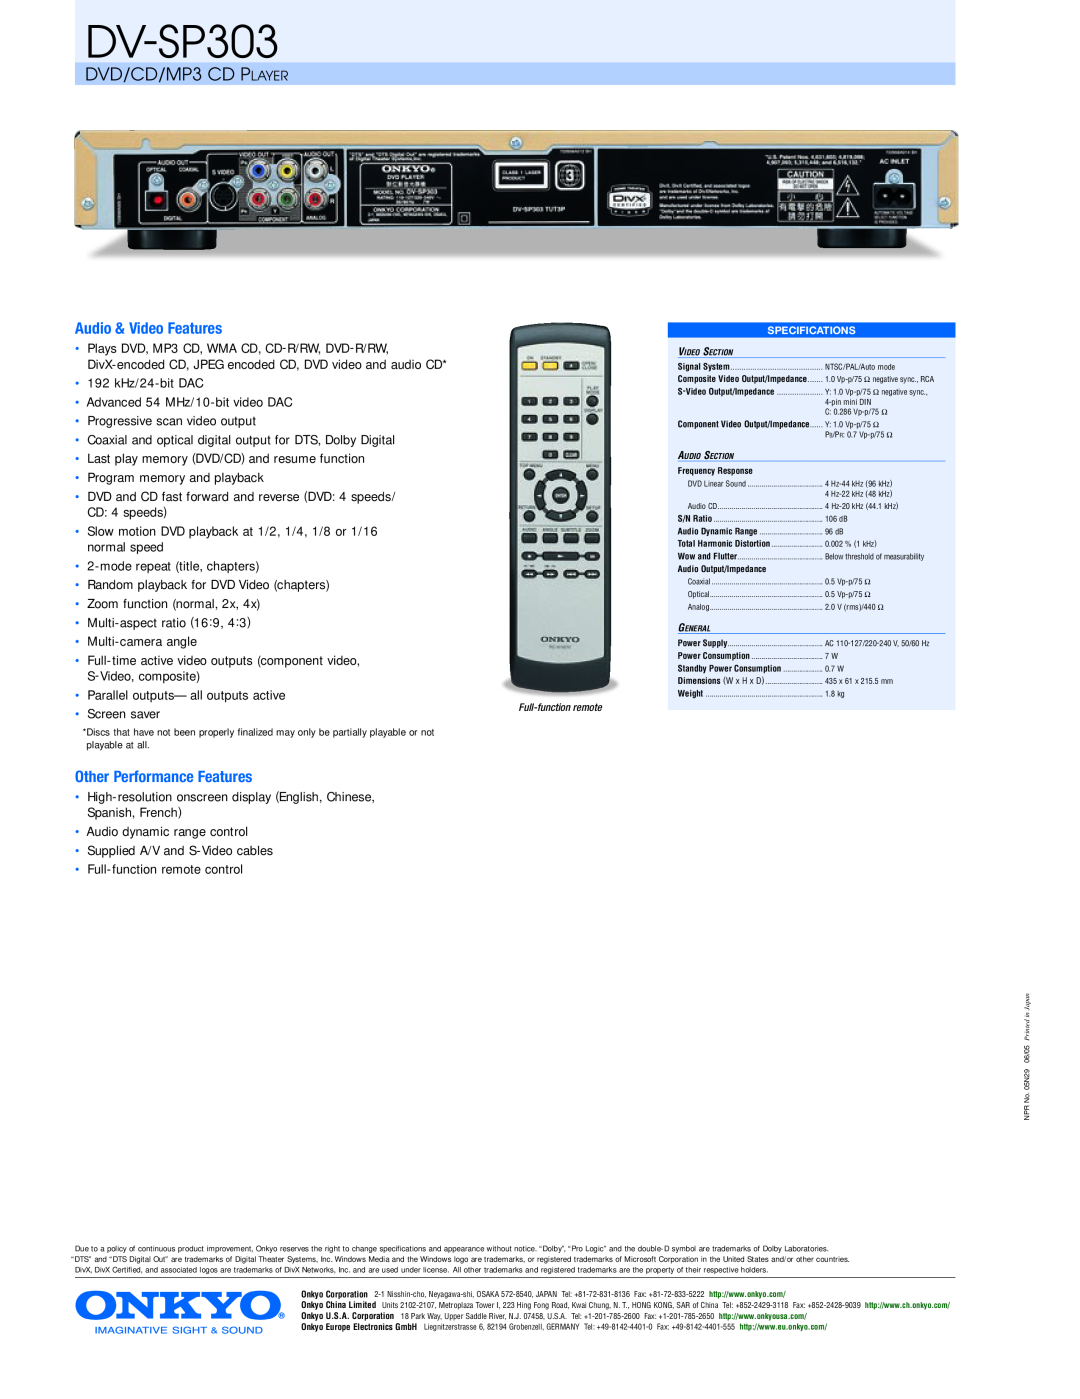 Onkyo DV- P303 manual DV-SP303, DVD/CD/MP3 CD PLAYER, Audio & Video Features, Screen saver, Other Performance Features 